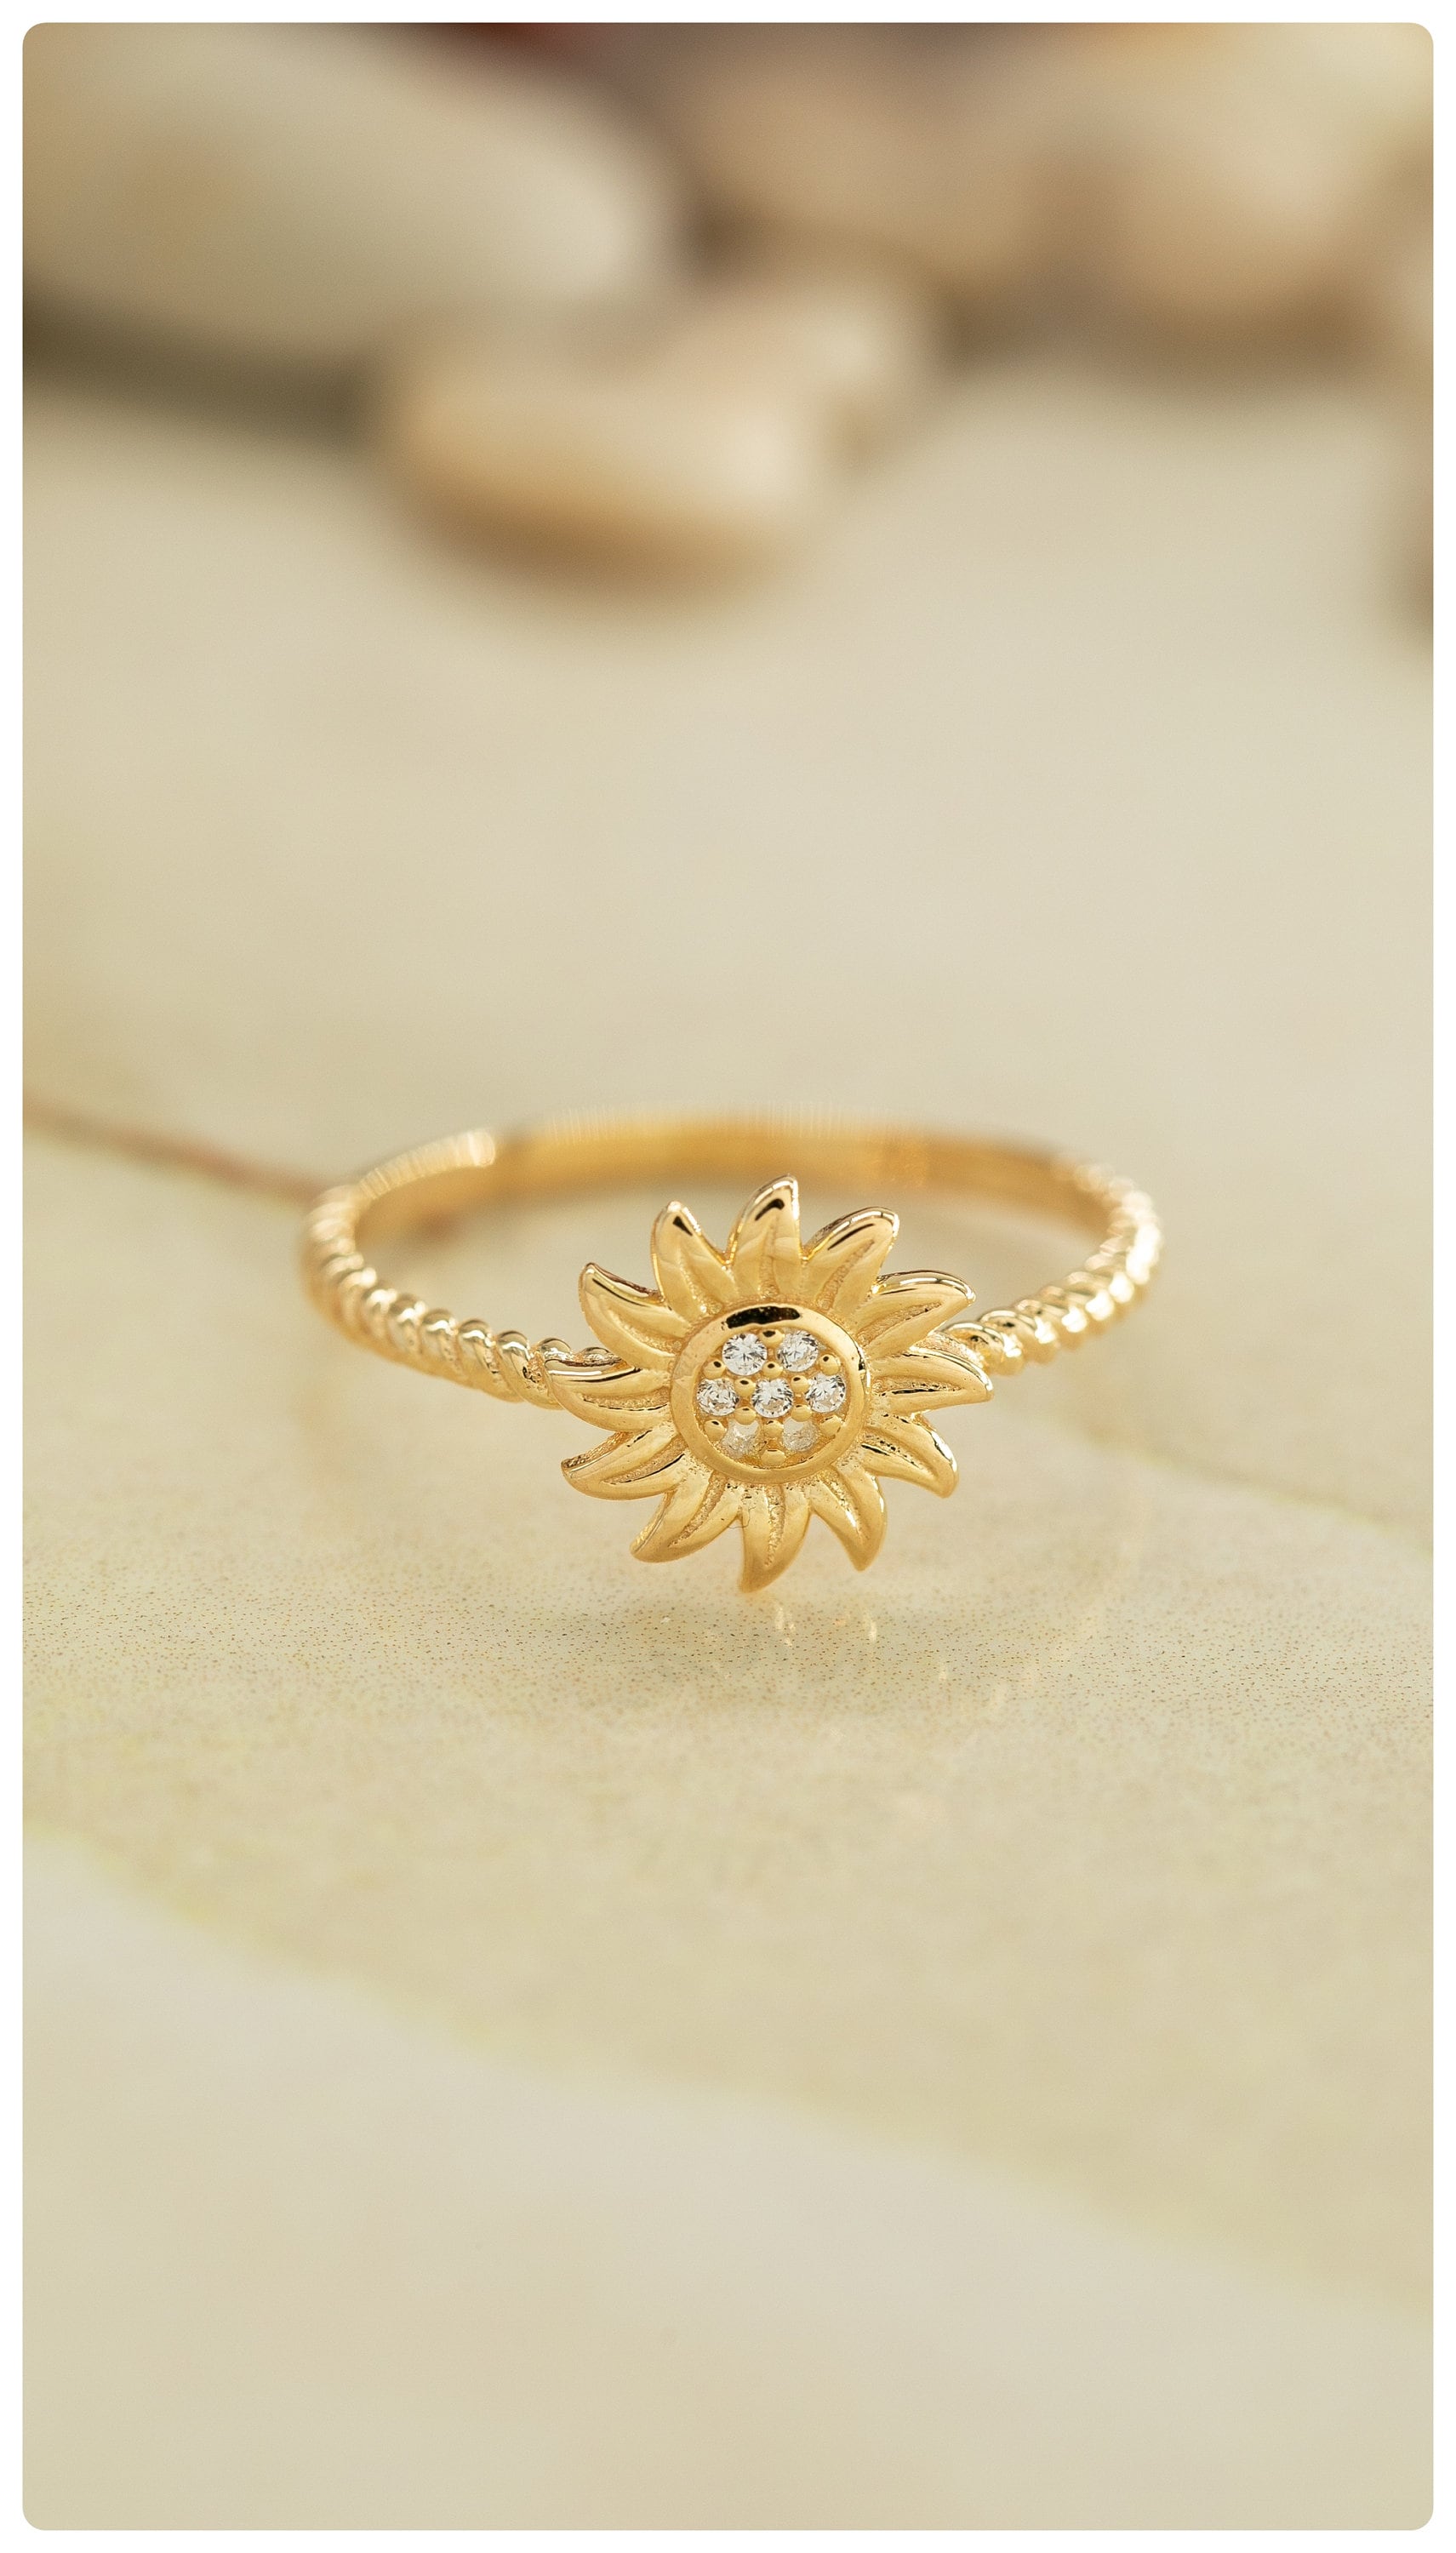 14K Solid Gold Sunflower Ring 925 Sterling Silver Floral Design, Dainty Jewelry for Women - Beautiful Flower Ring - Perfect Gift for Her